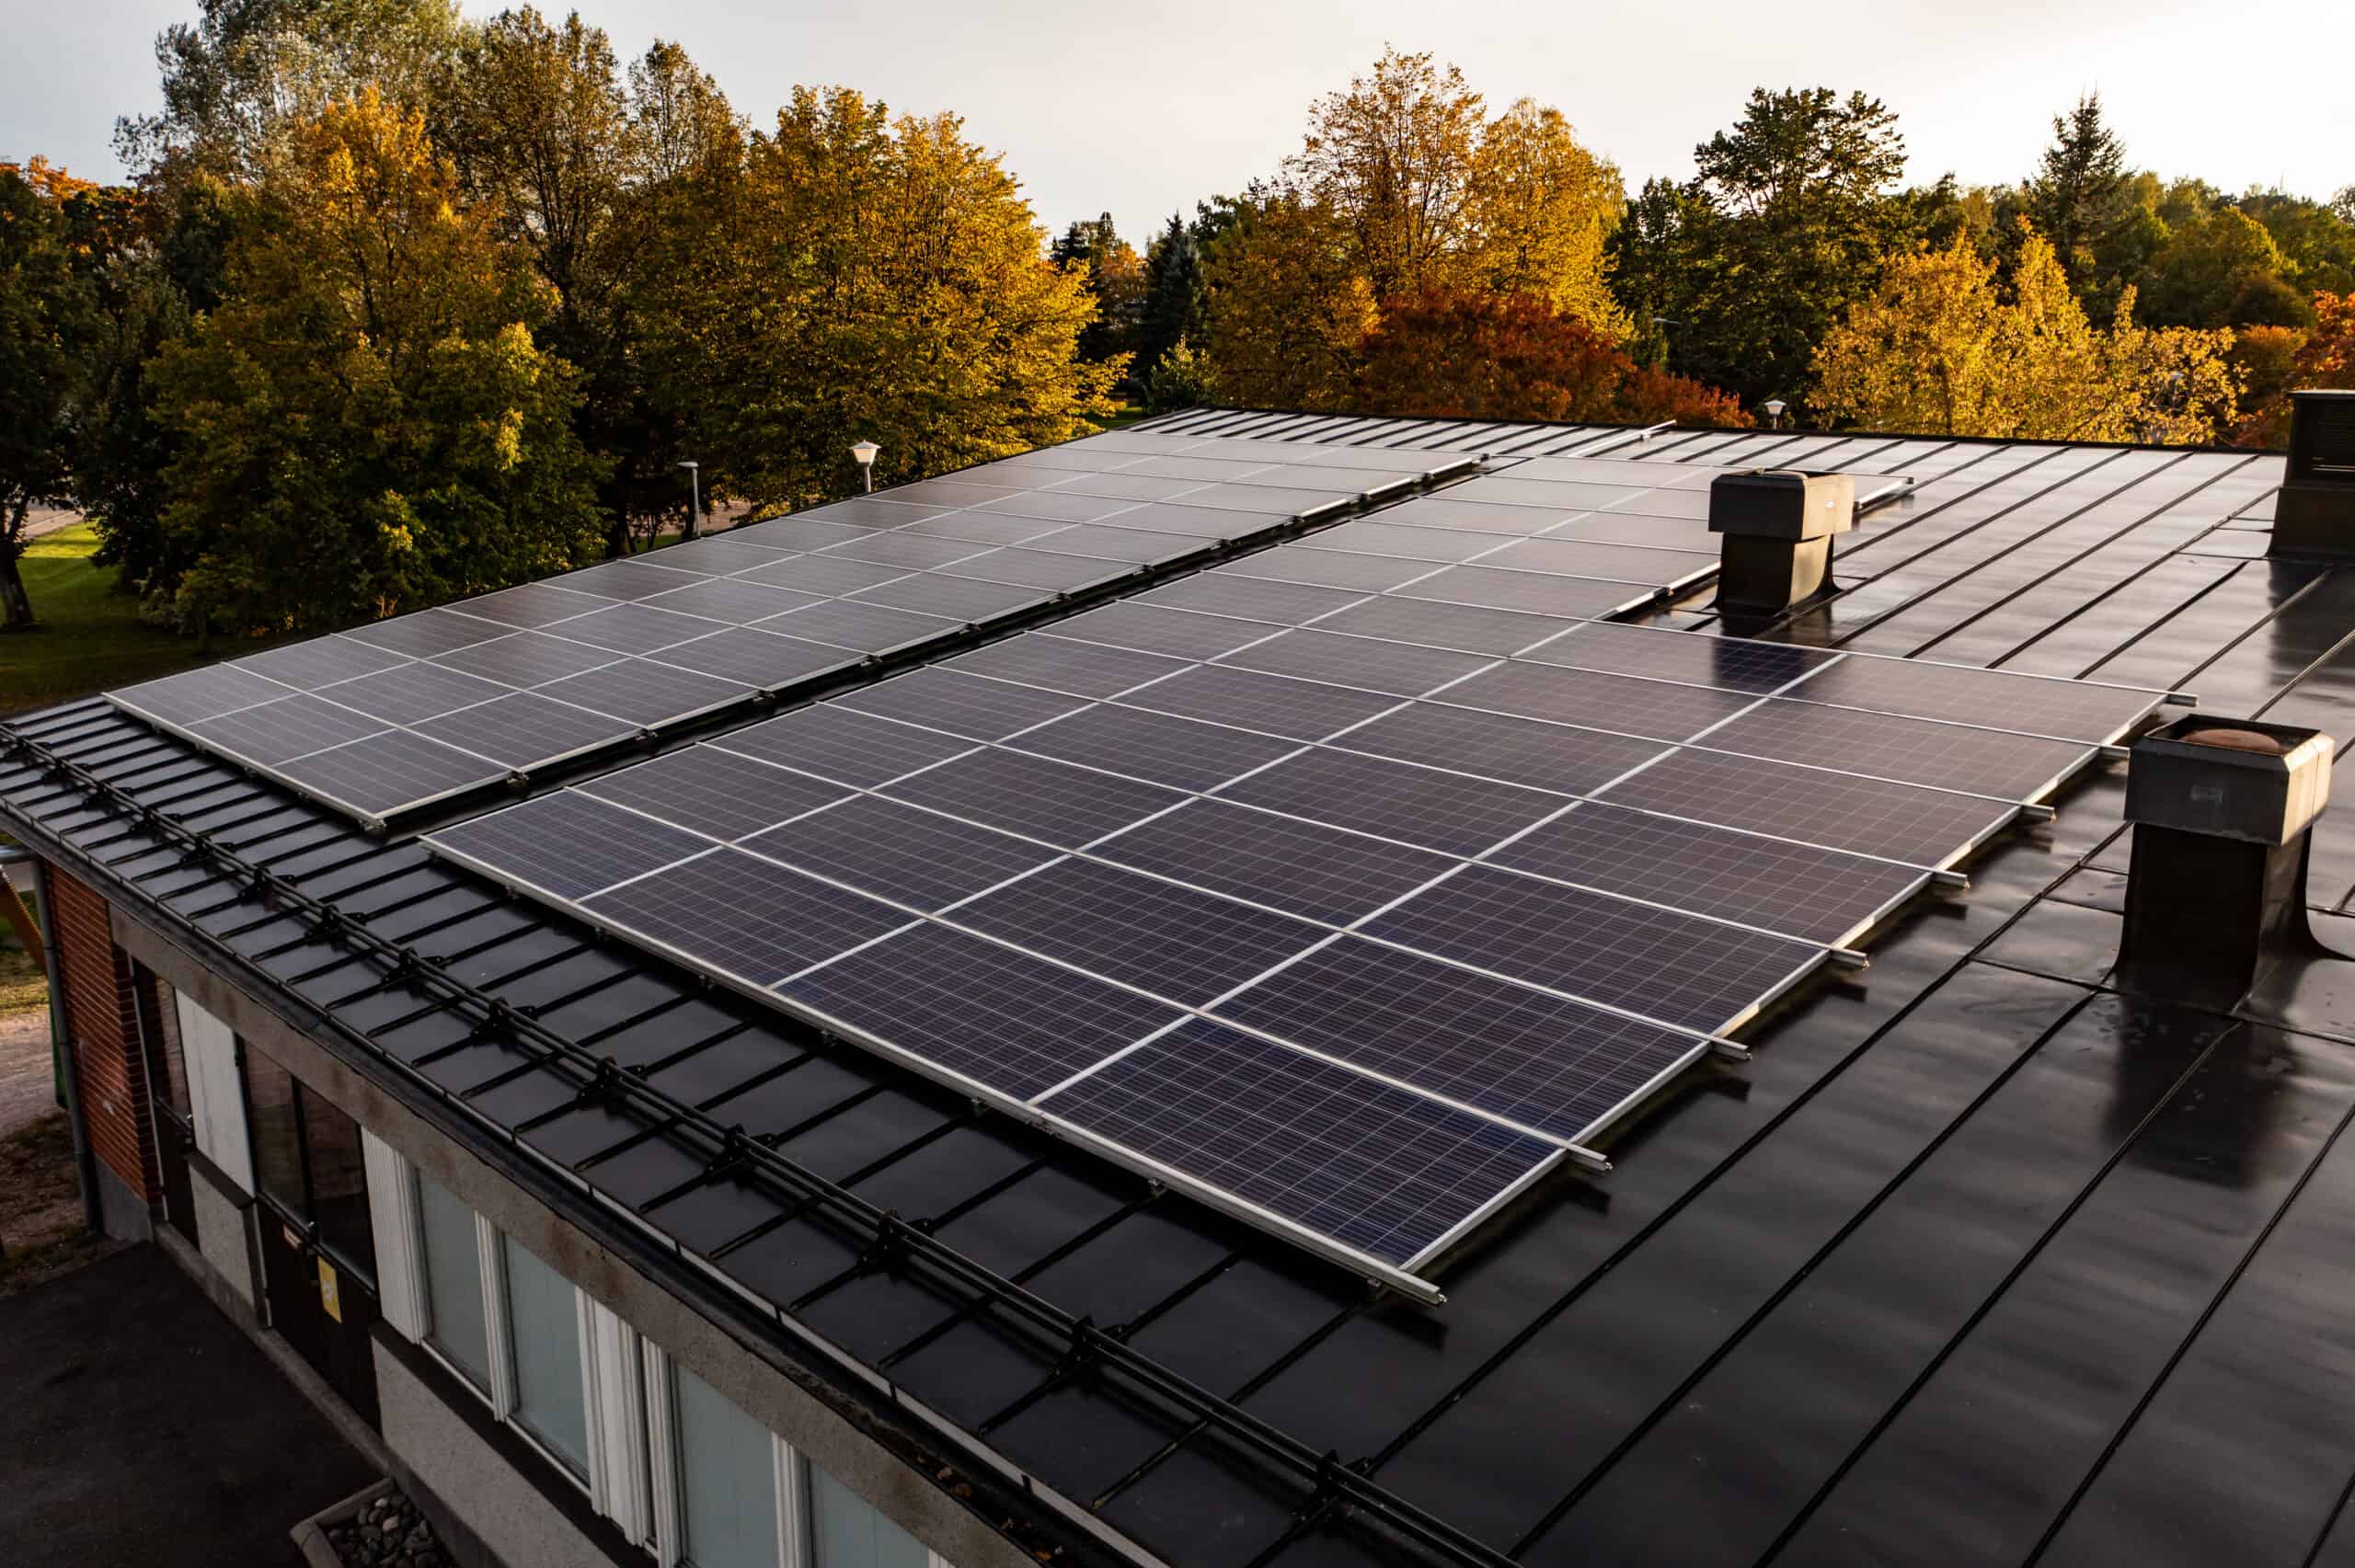 Solar Add-ons are making a huge difference for homeowners